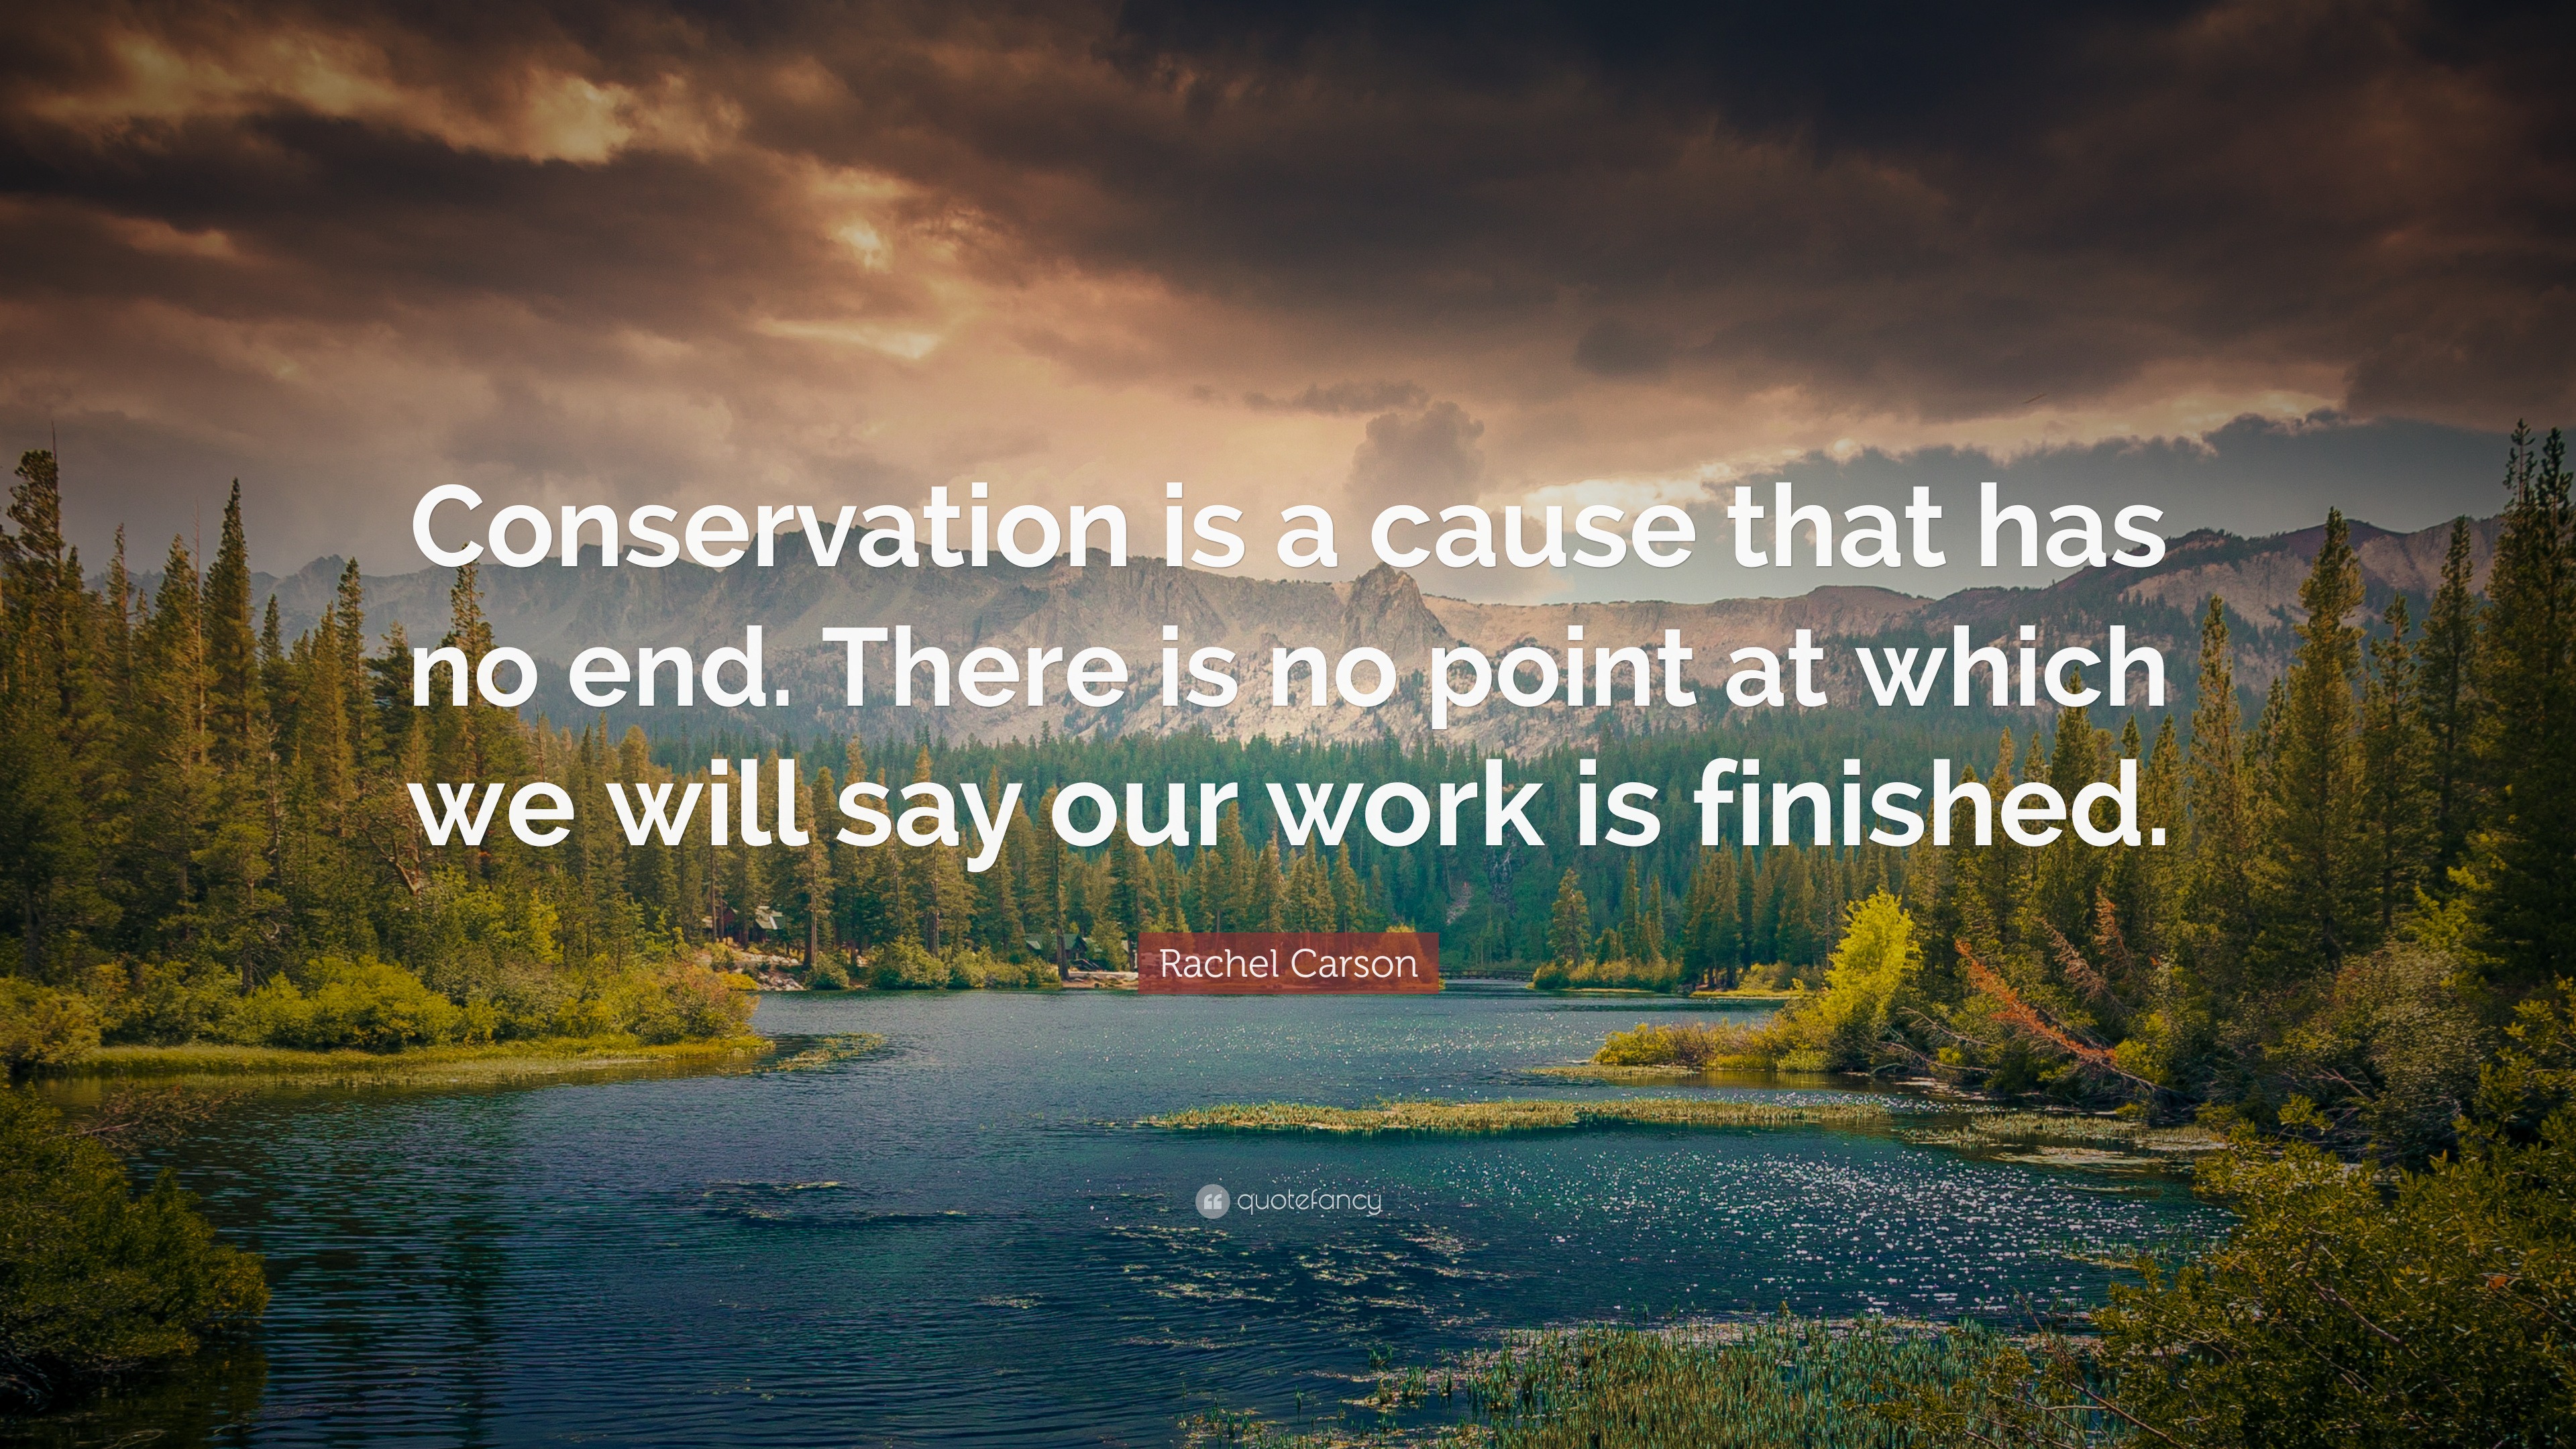 Rachel Carson Quote: “Conservation is a cause that has no end. There is